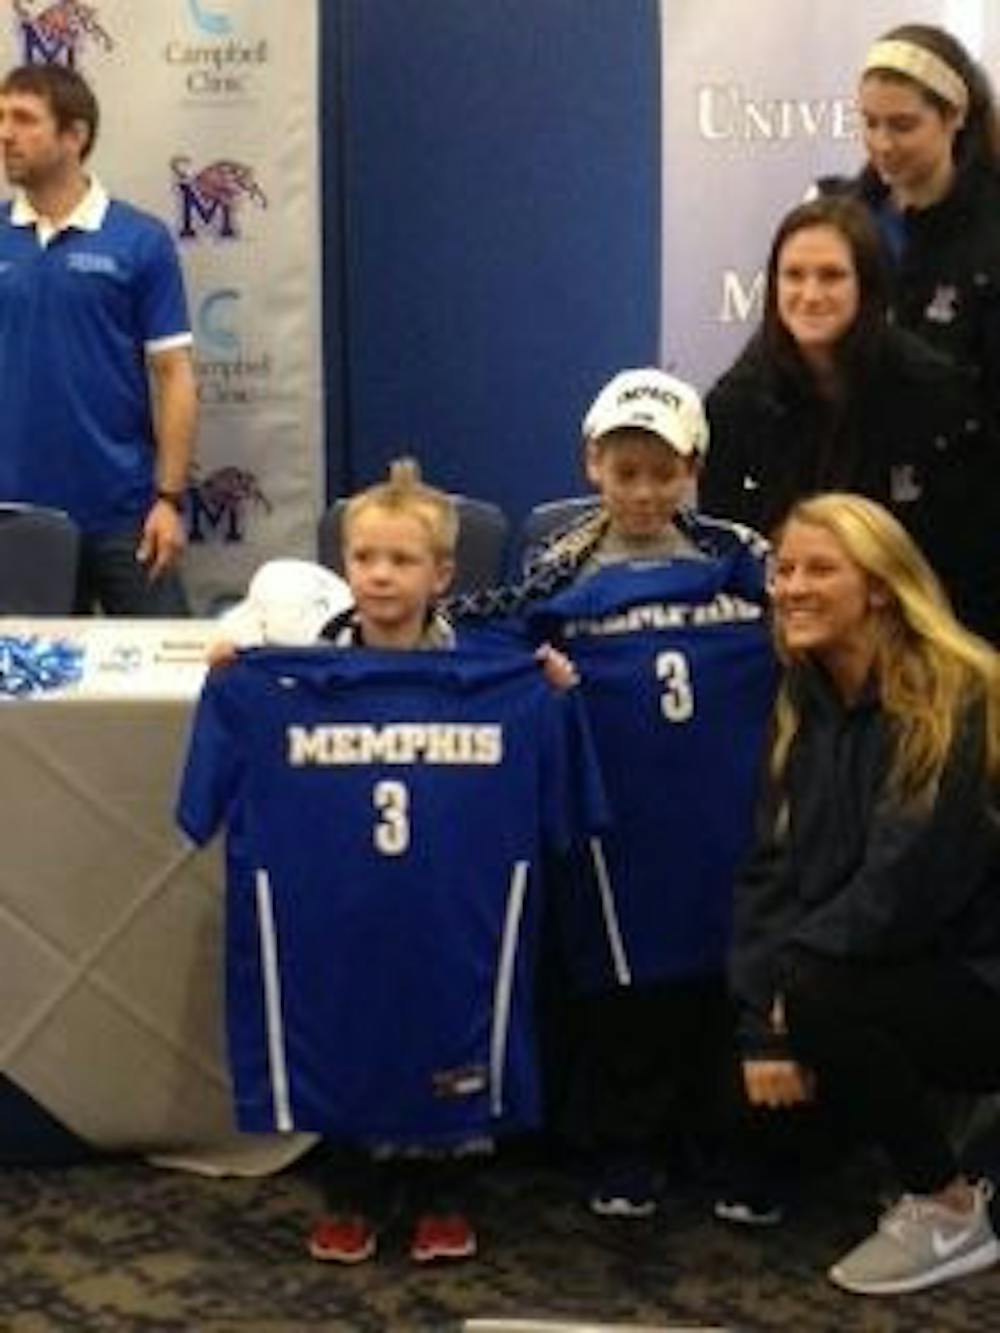 <p class="p1"><strong>Maddox and Brooks pose with their jerseys next to Sydney Kingston, Elizabeth Woerner, and Lauren Sobral of the women’s soccer team.&nbsp;</strong></p>